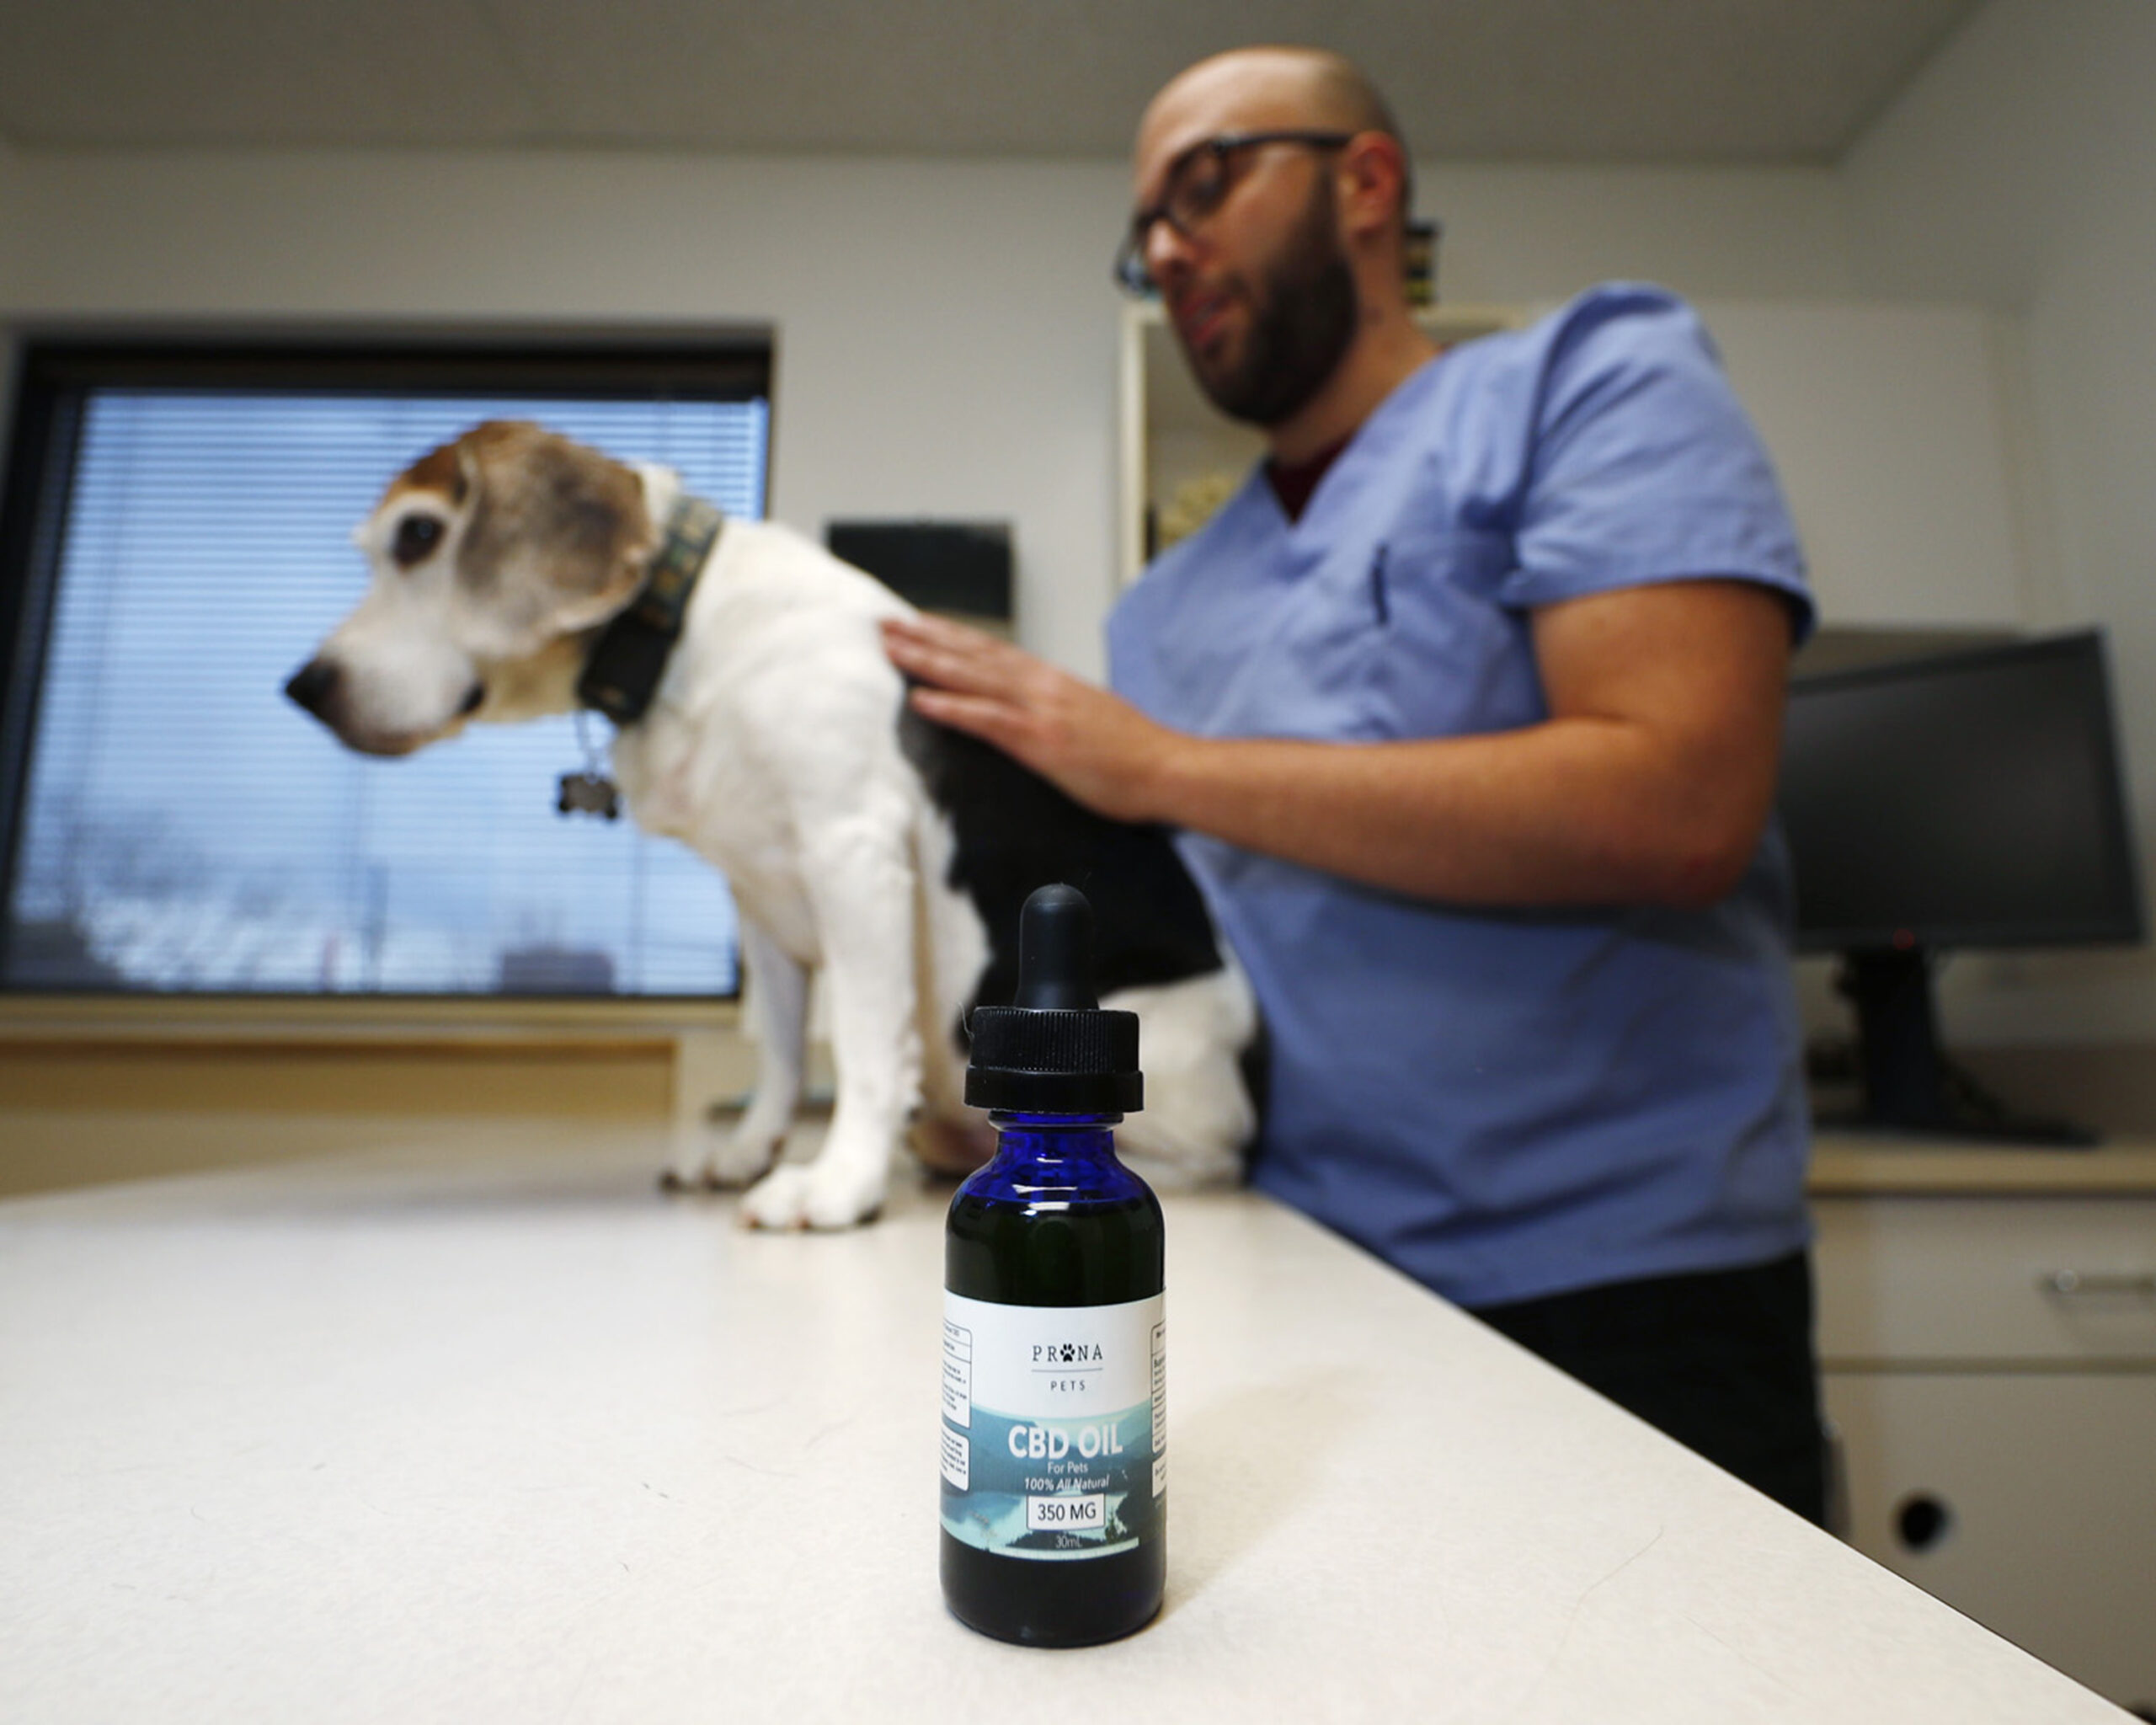 CBD oil being administered to dog